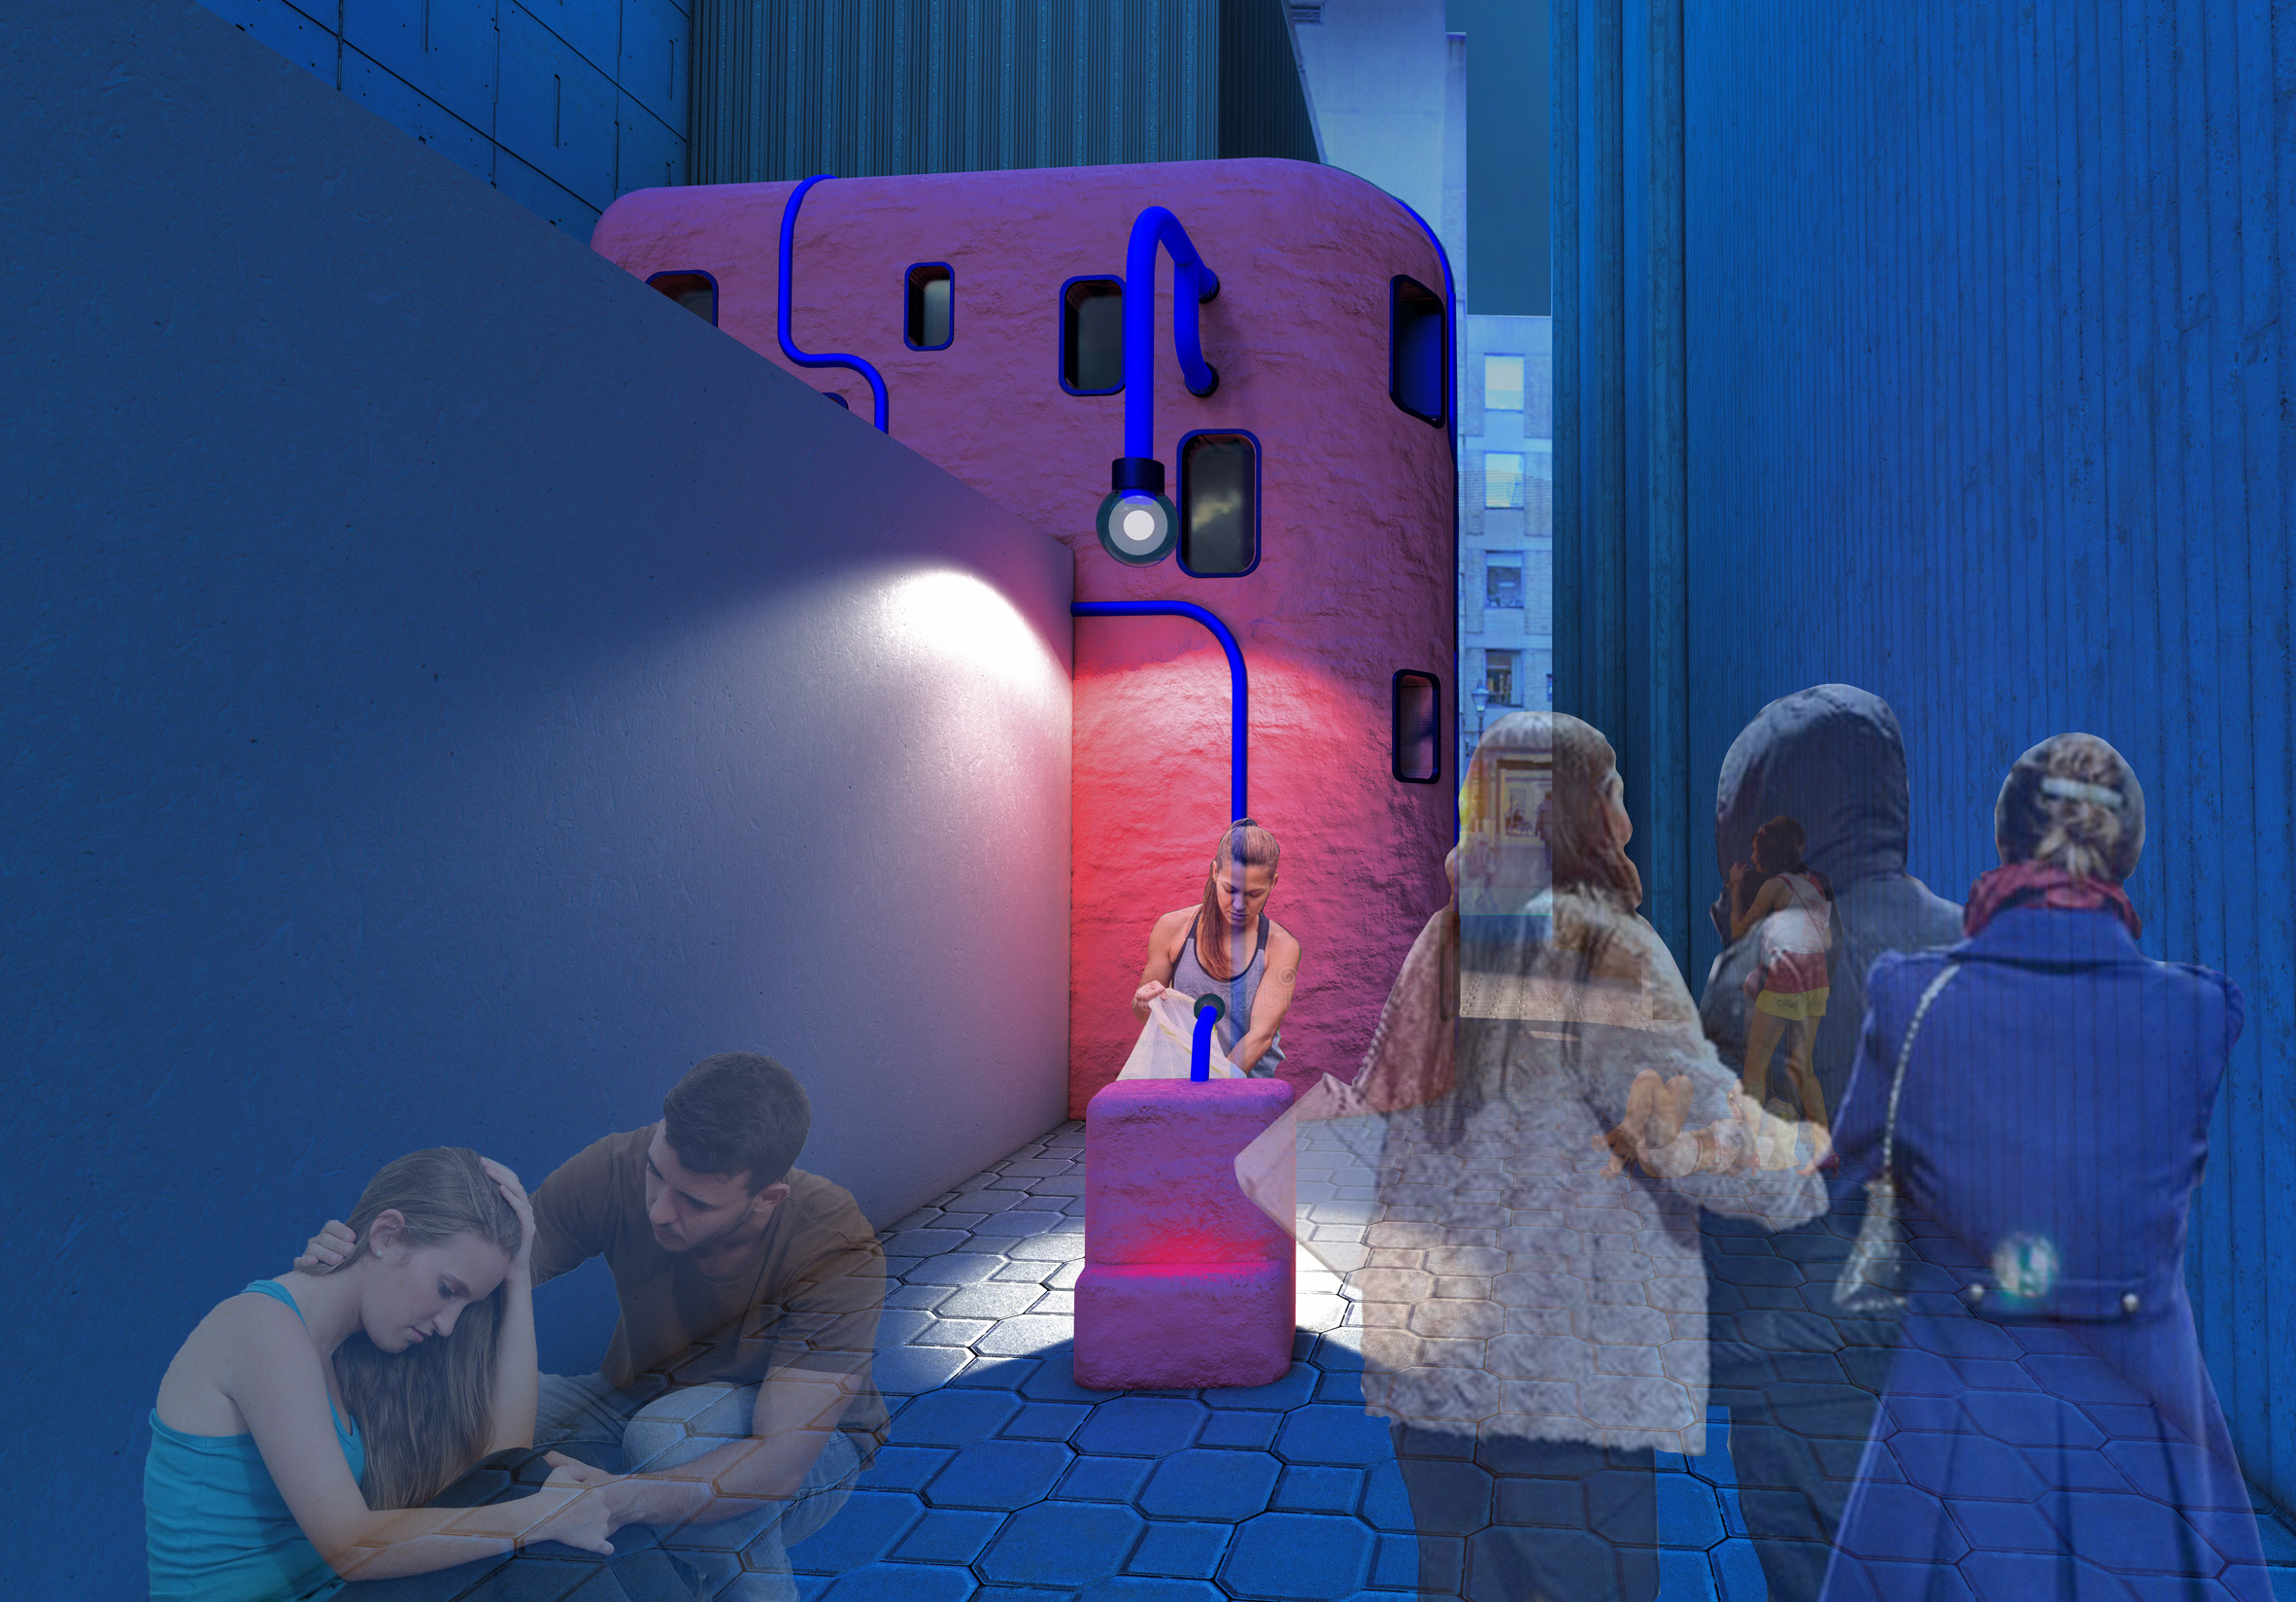 Visualisation of a compact burrito restaurant selling food in a small alleyway at night